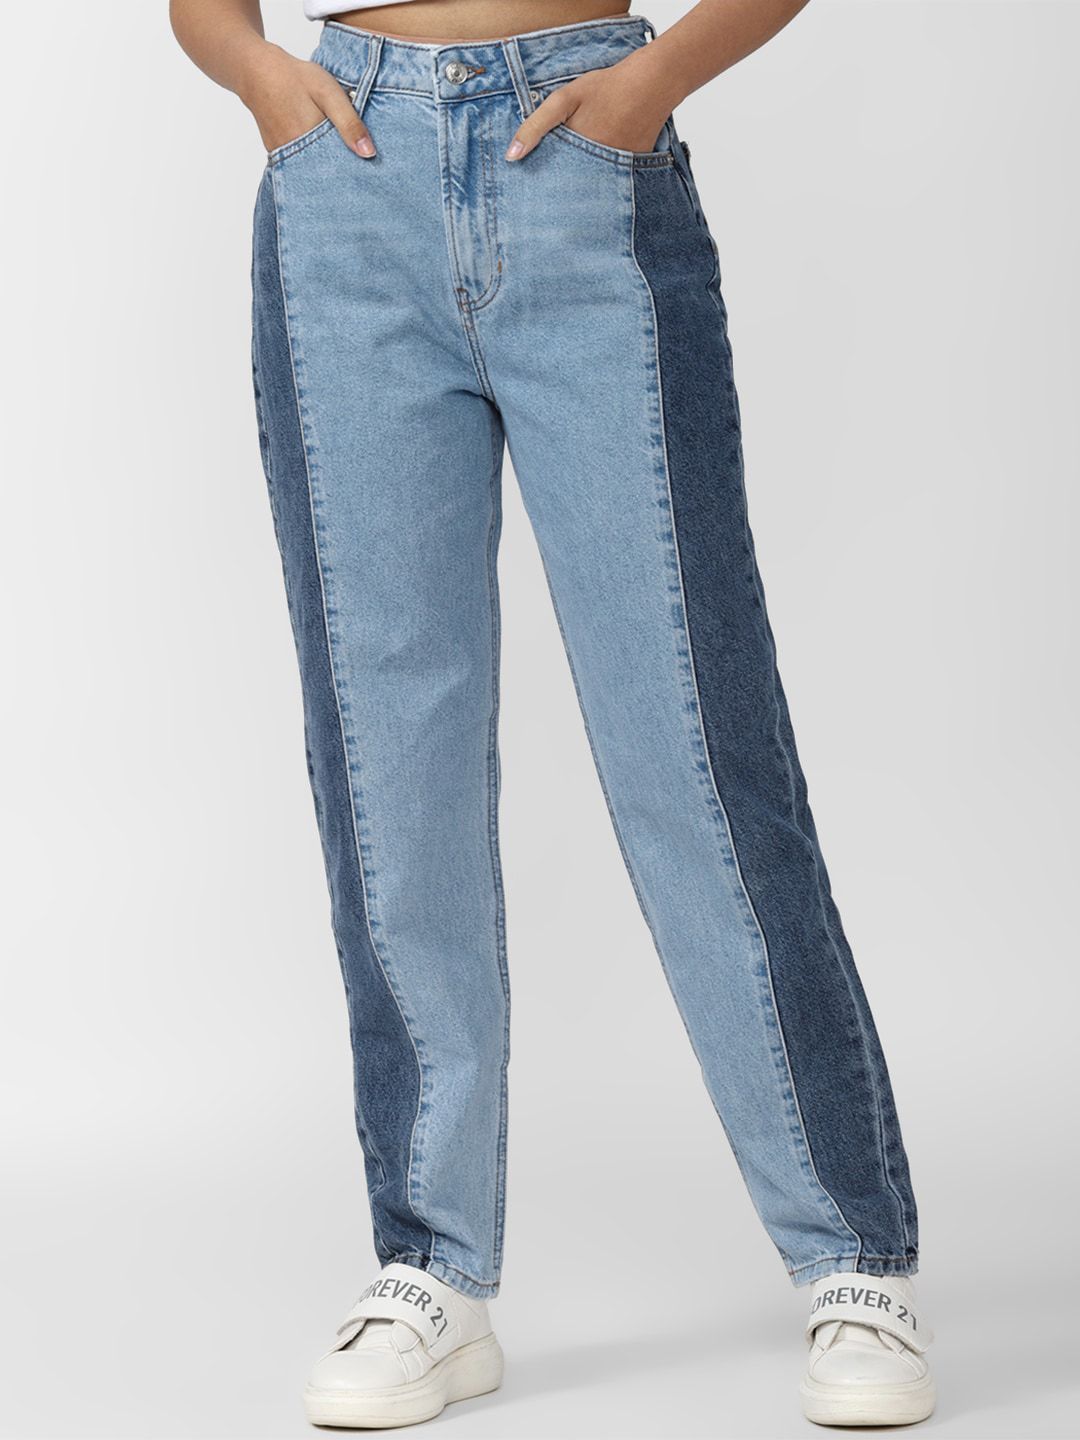 FOREVER 21 Women Blue Mildly Distressed Jeans Price in India